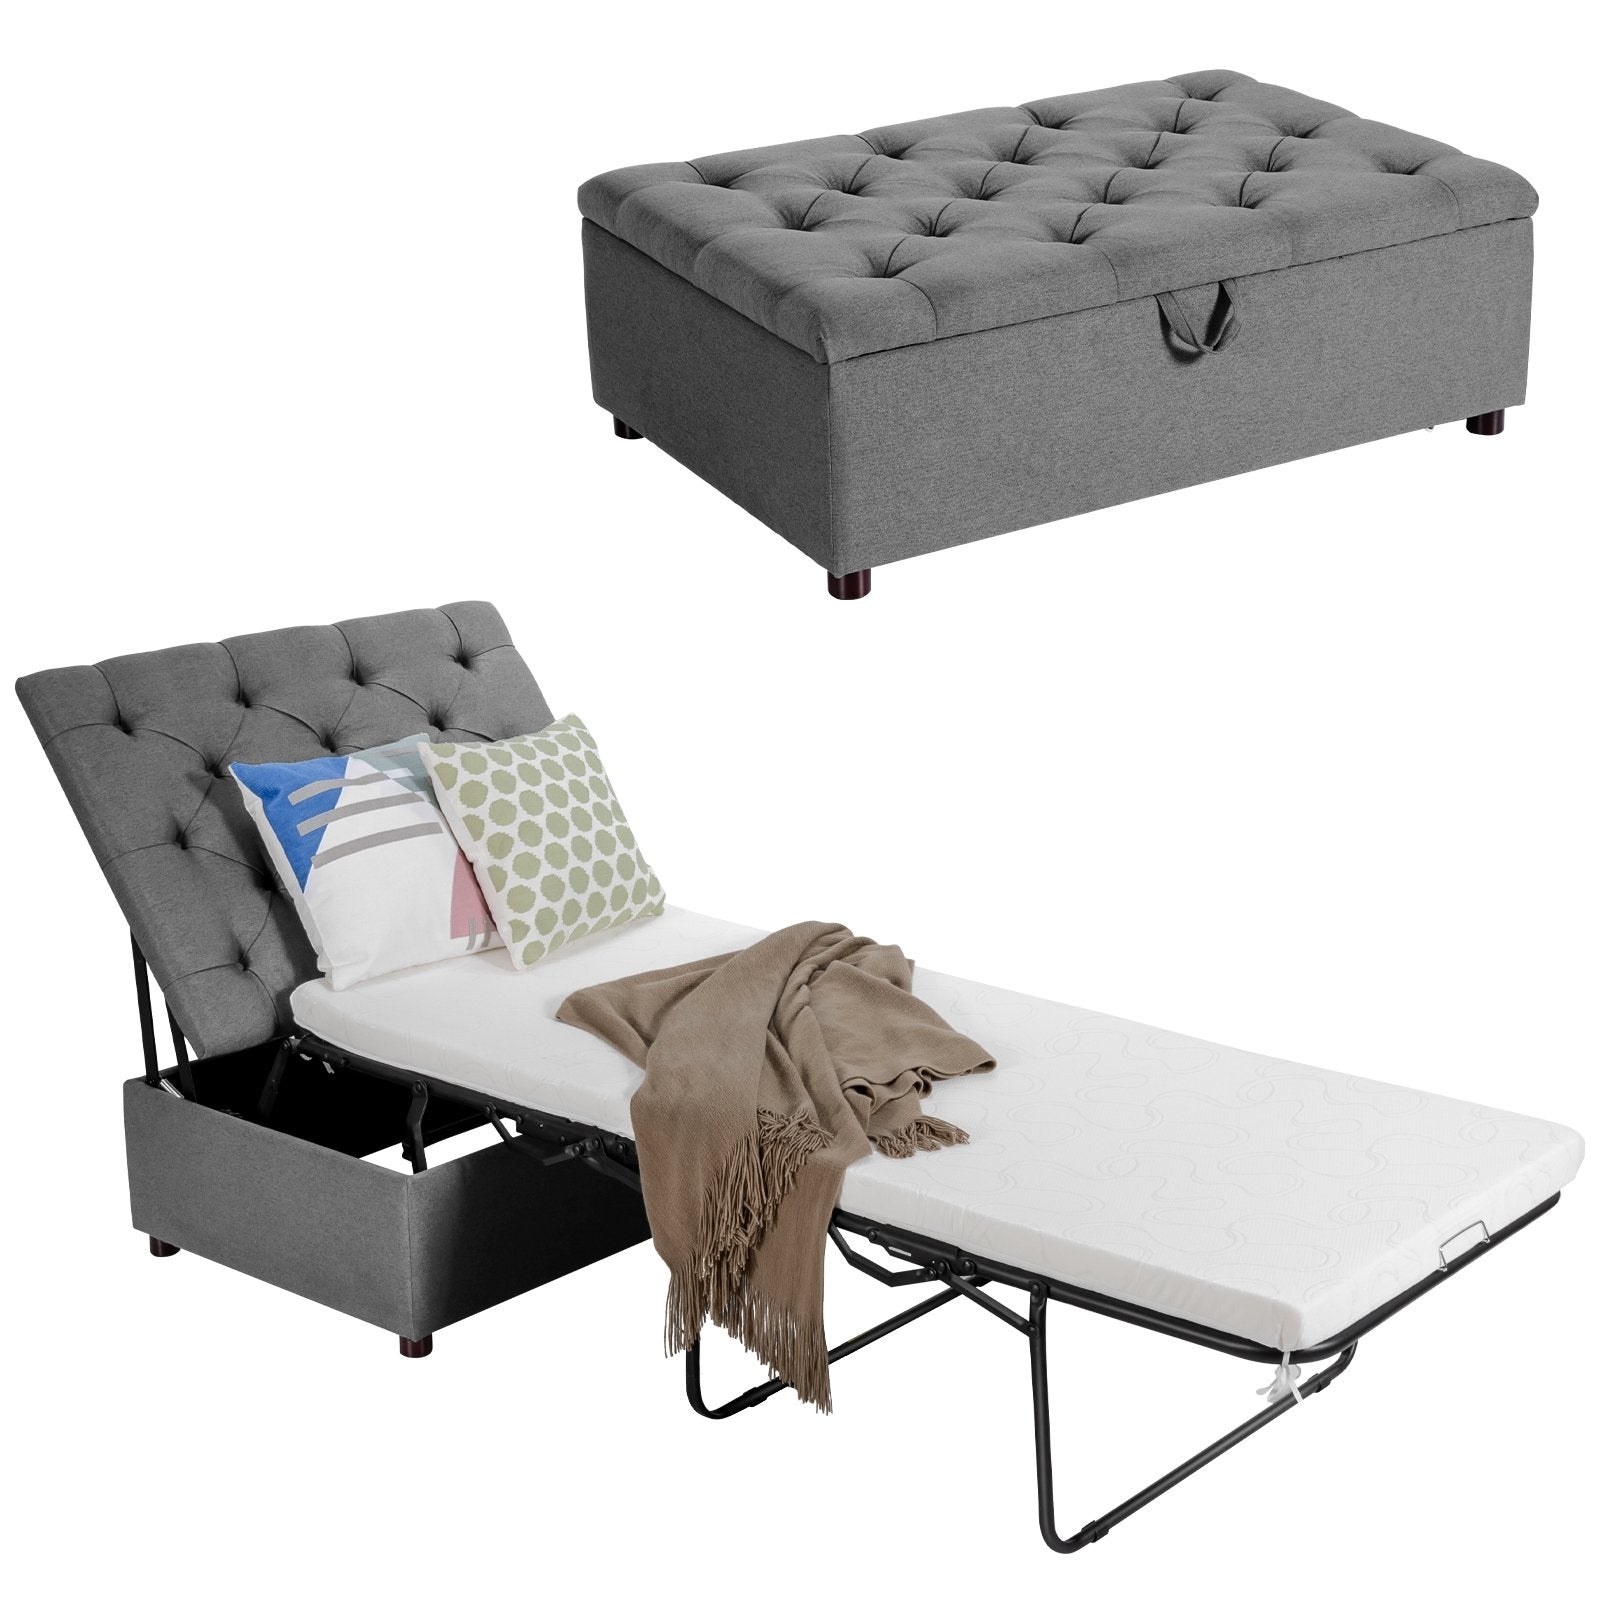 Folding Ottoman Sleeper Bed with Mattress for Guest Bed and Office Nap, Gray - Gallery Canada